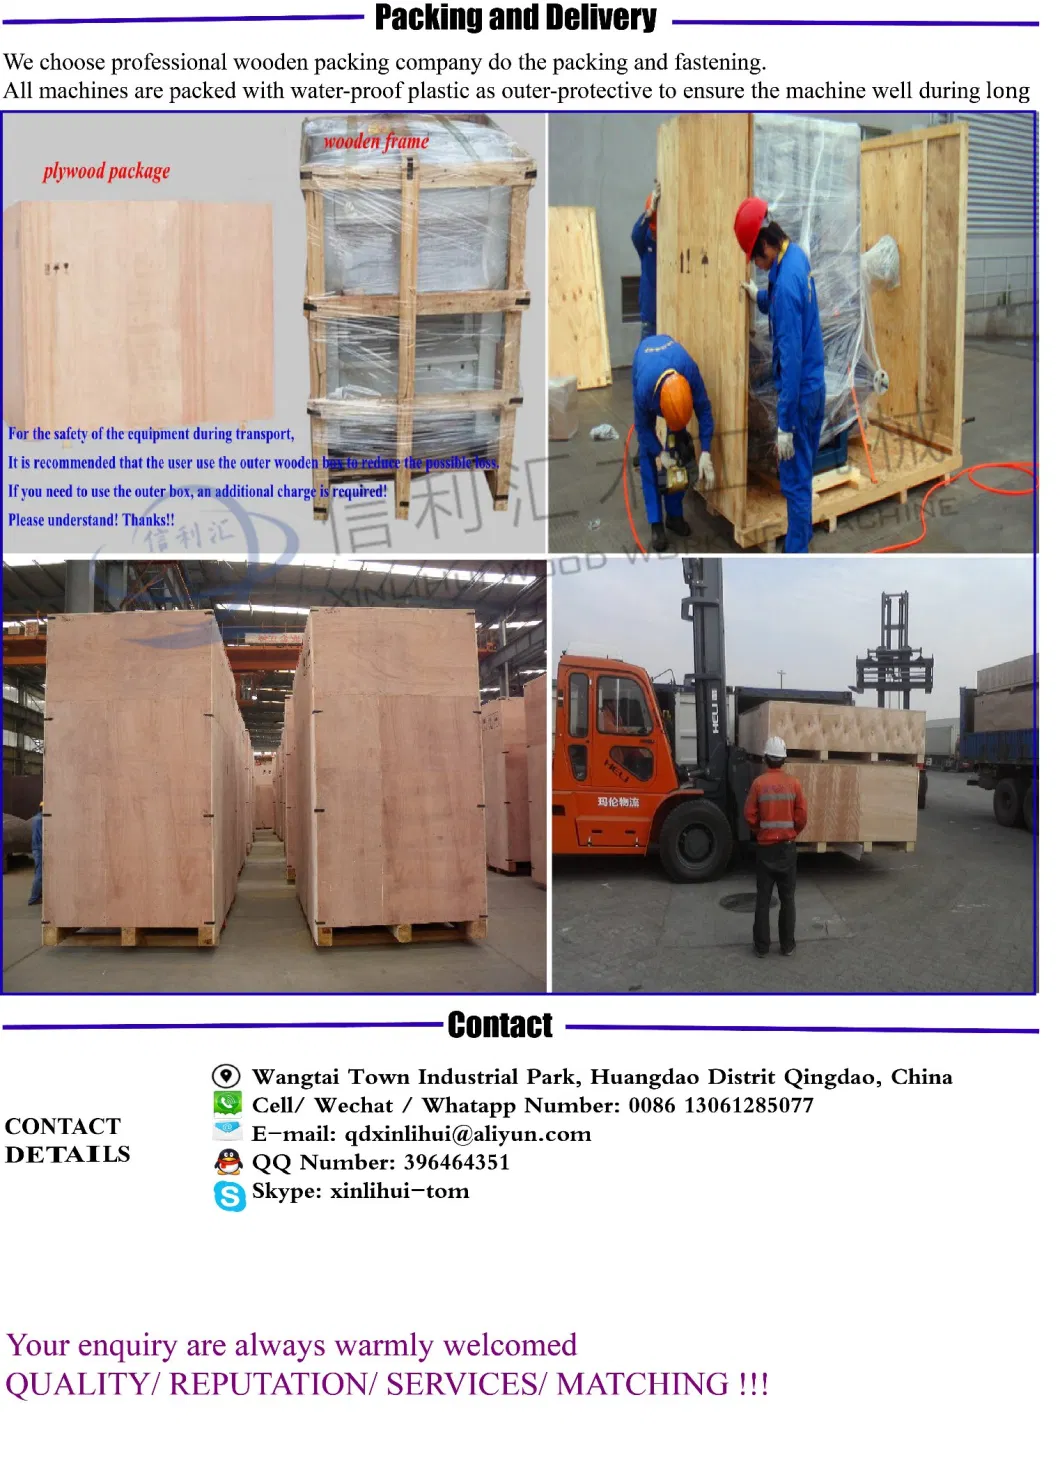 Woodworking Machine Automatic Sawing Machine for Cutting Four Edges of Most Kinds of Panels. Longitudinal and Transverse Wood Saw